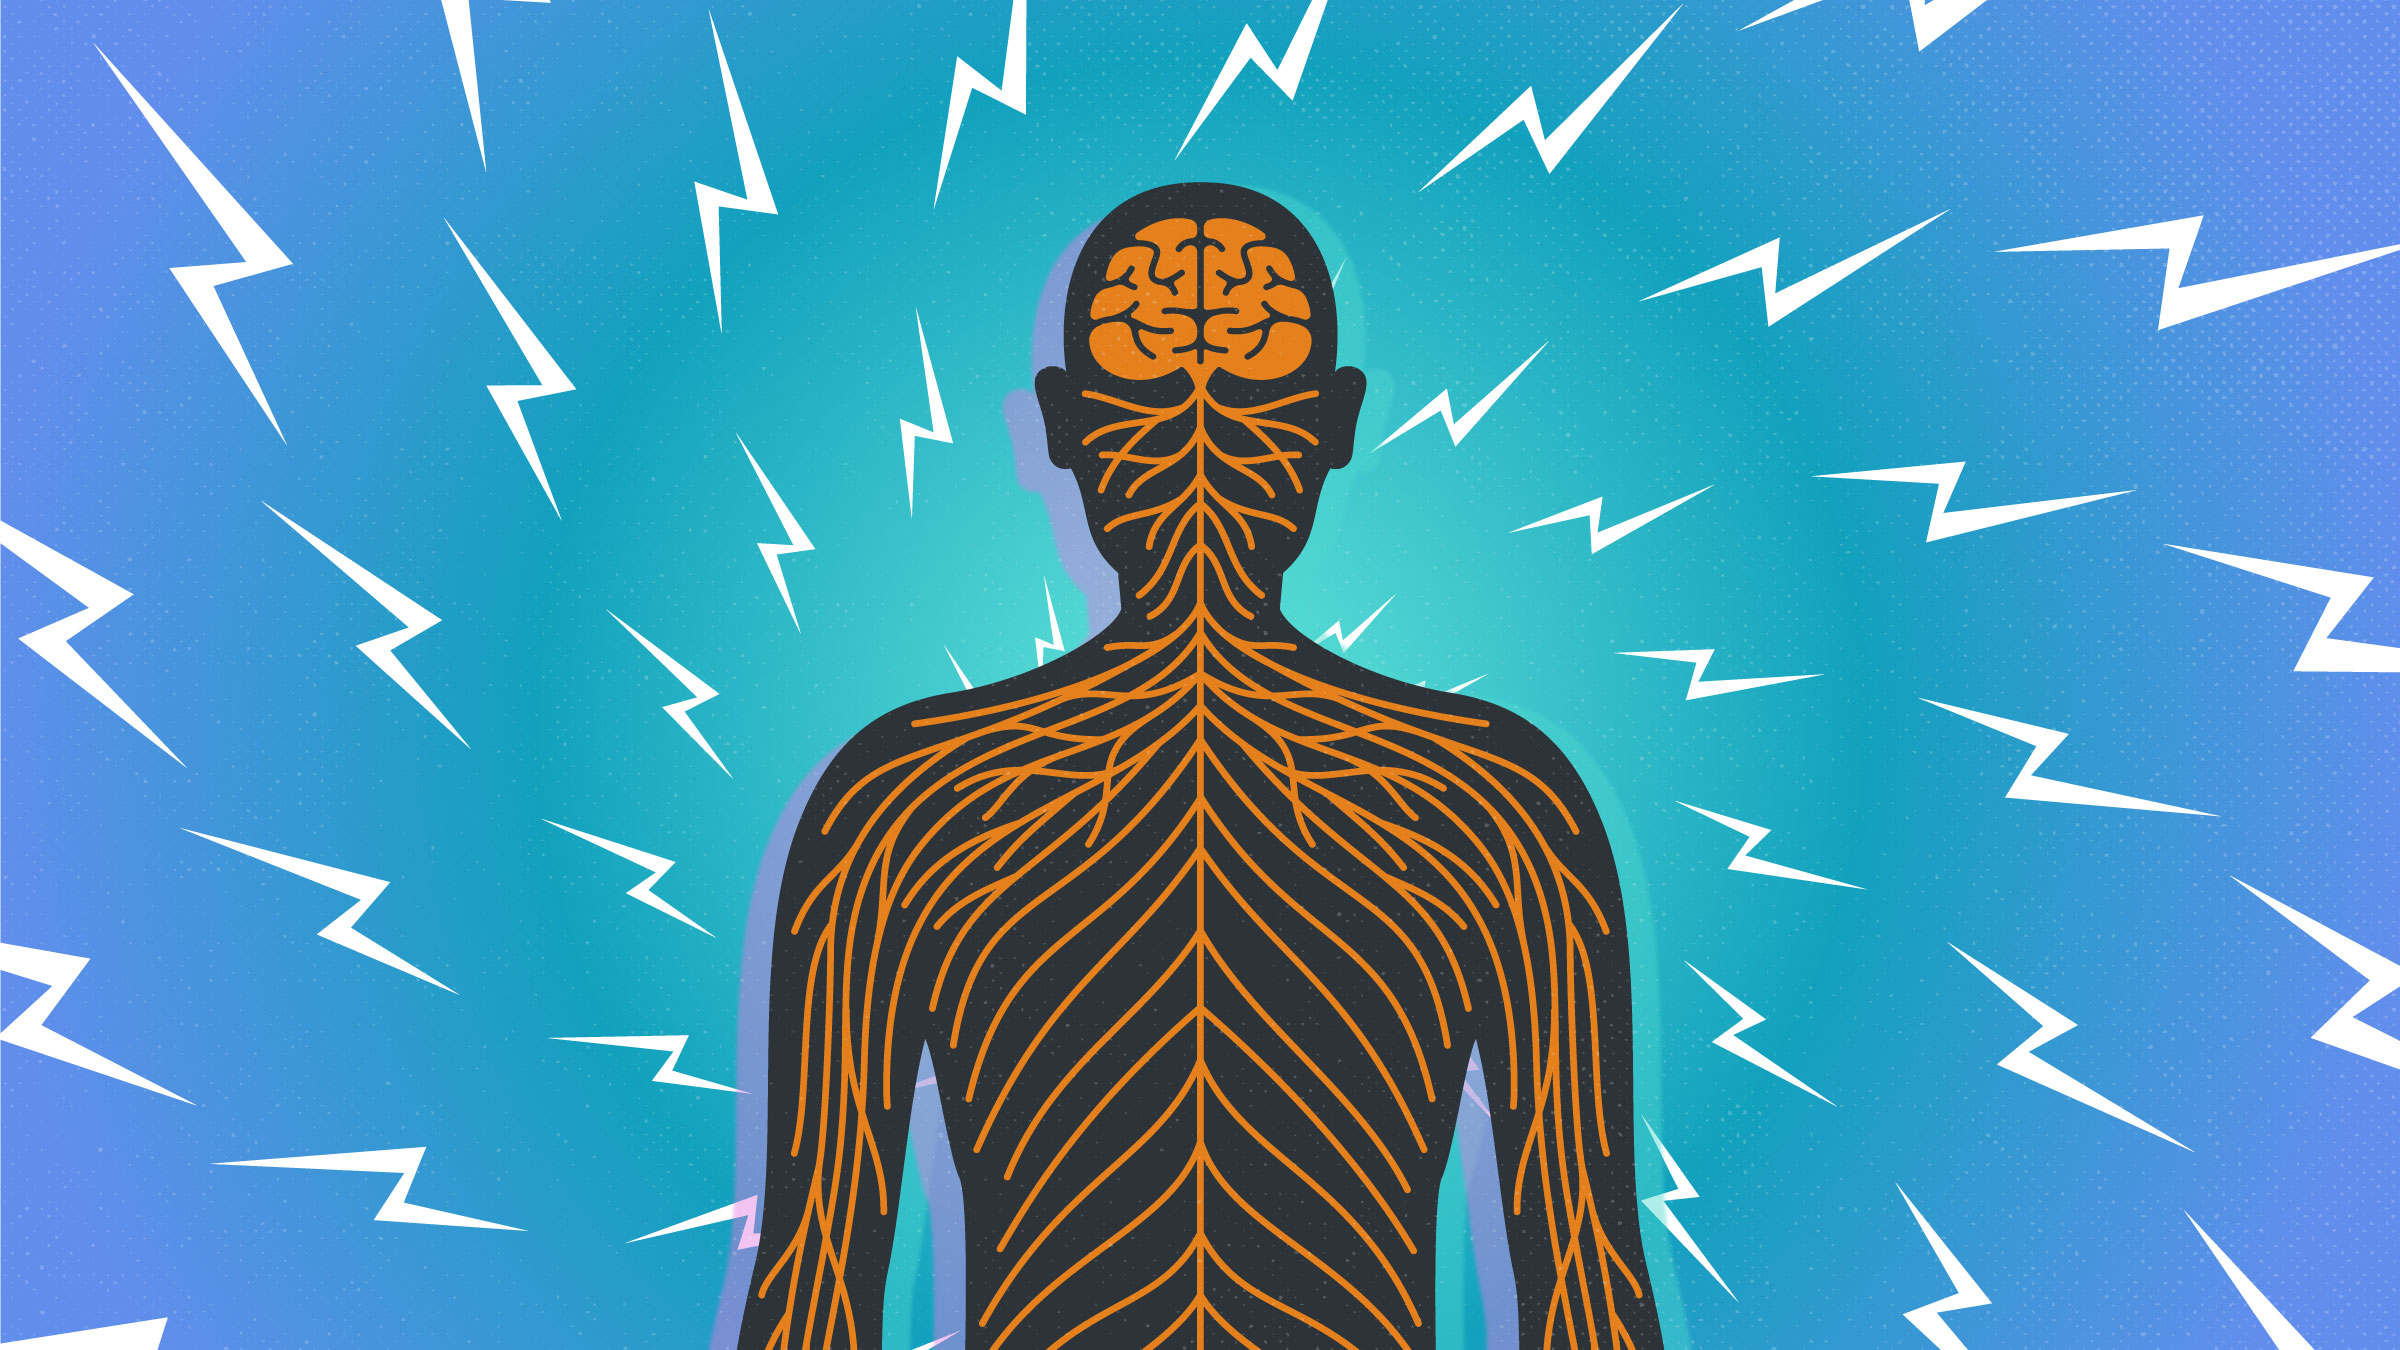 Artist drawing of a black human shape with images of brain and nervous system overlaid in orange. Blue background with white lightening bolts.